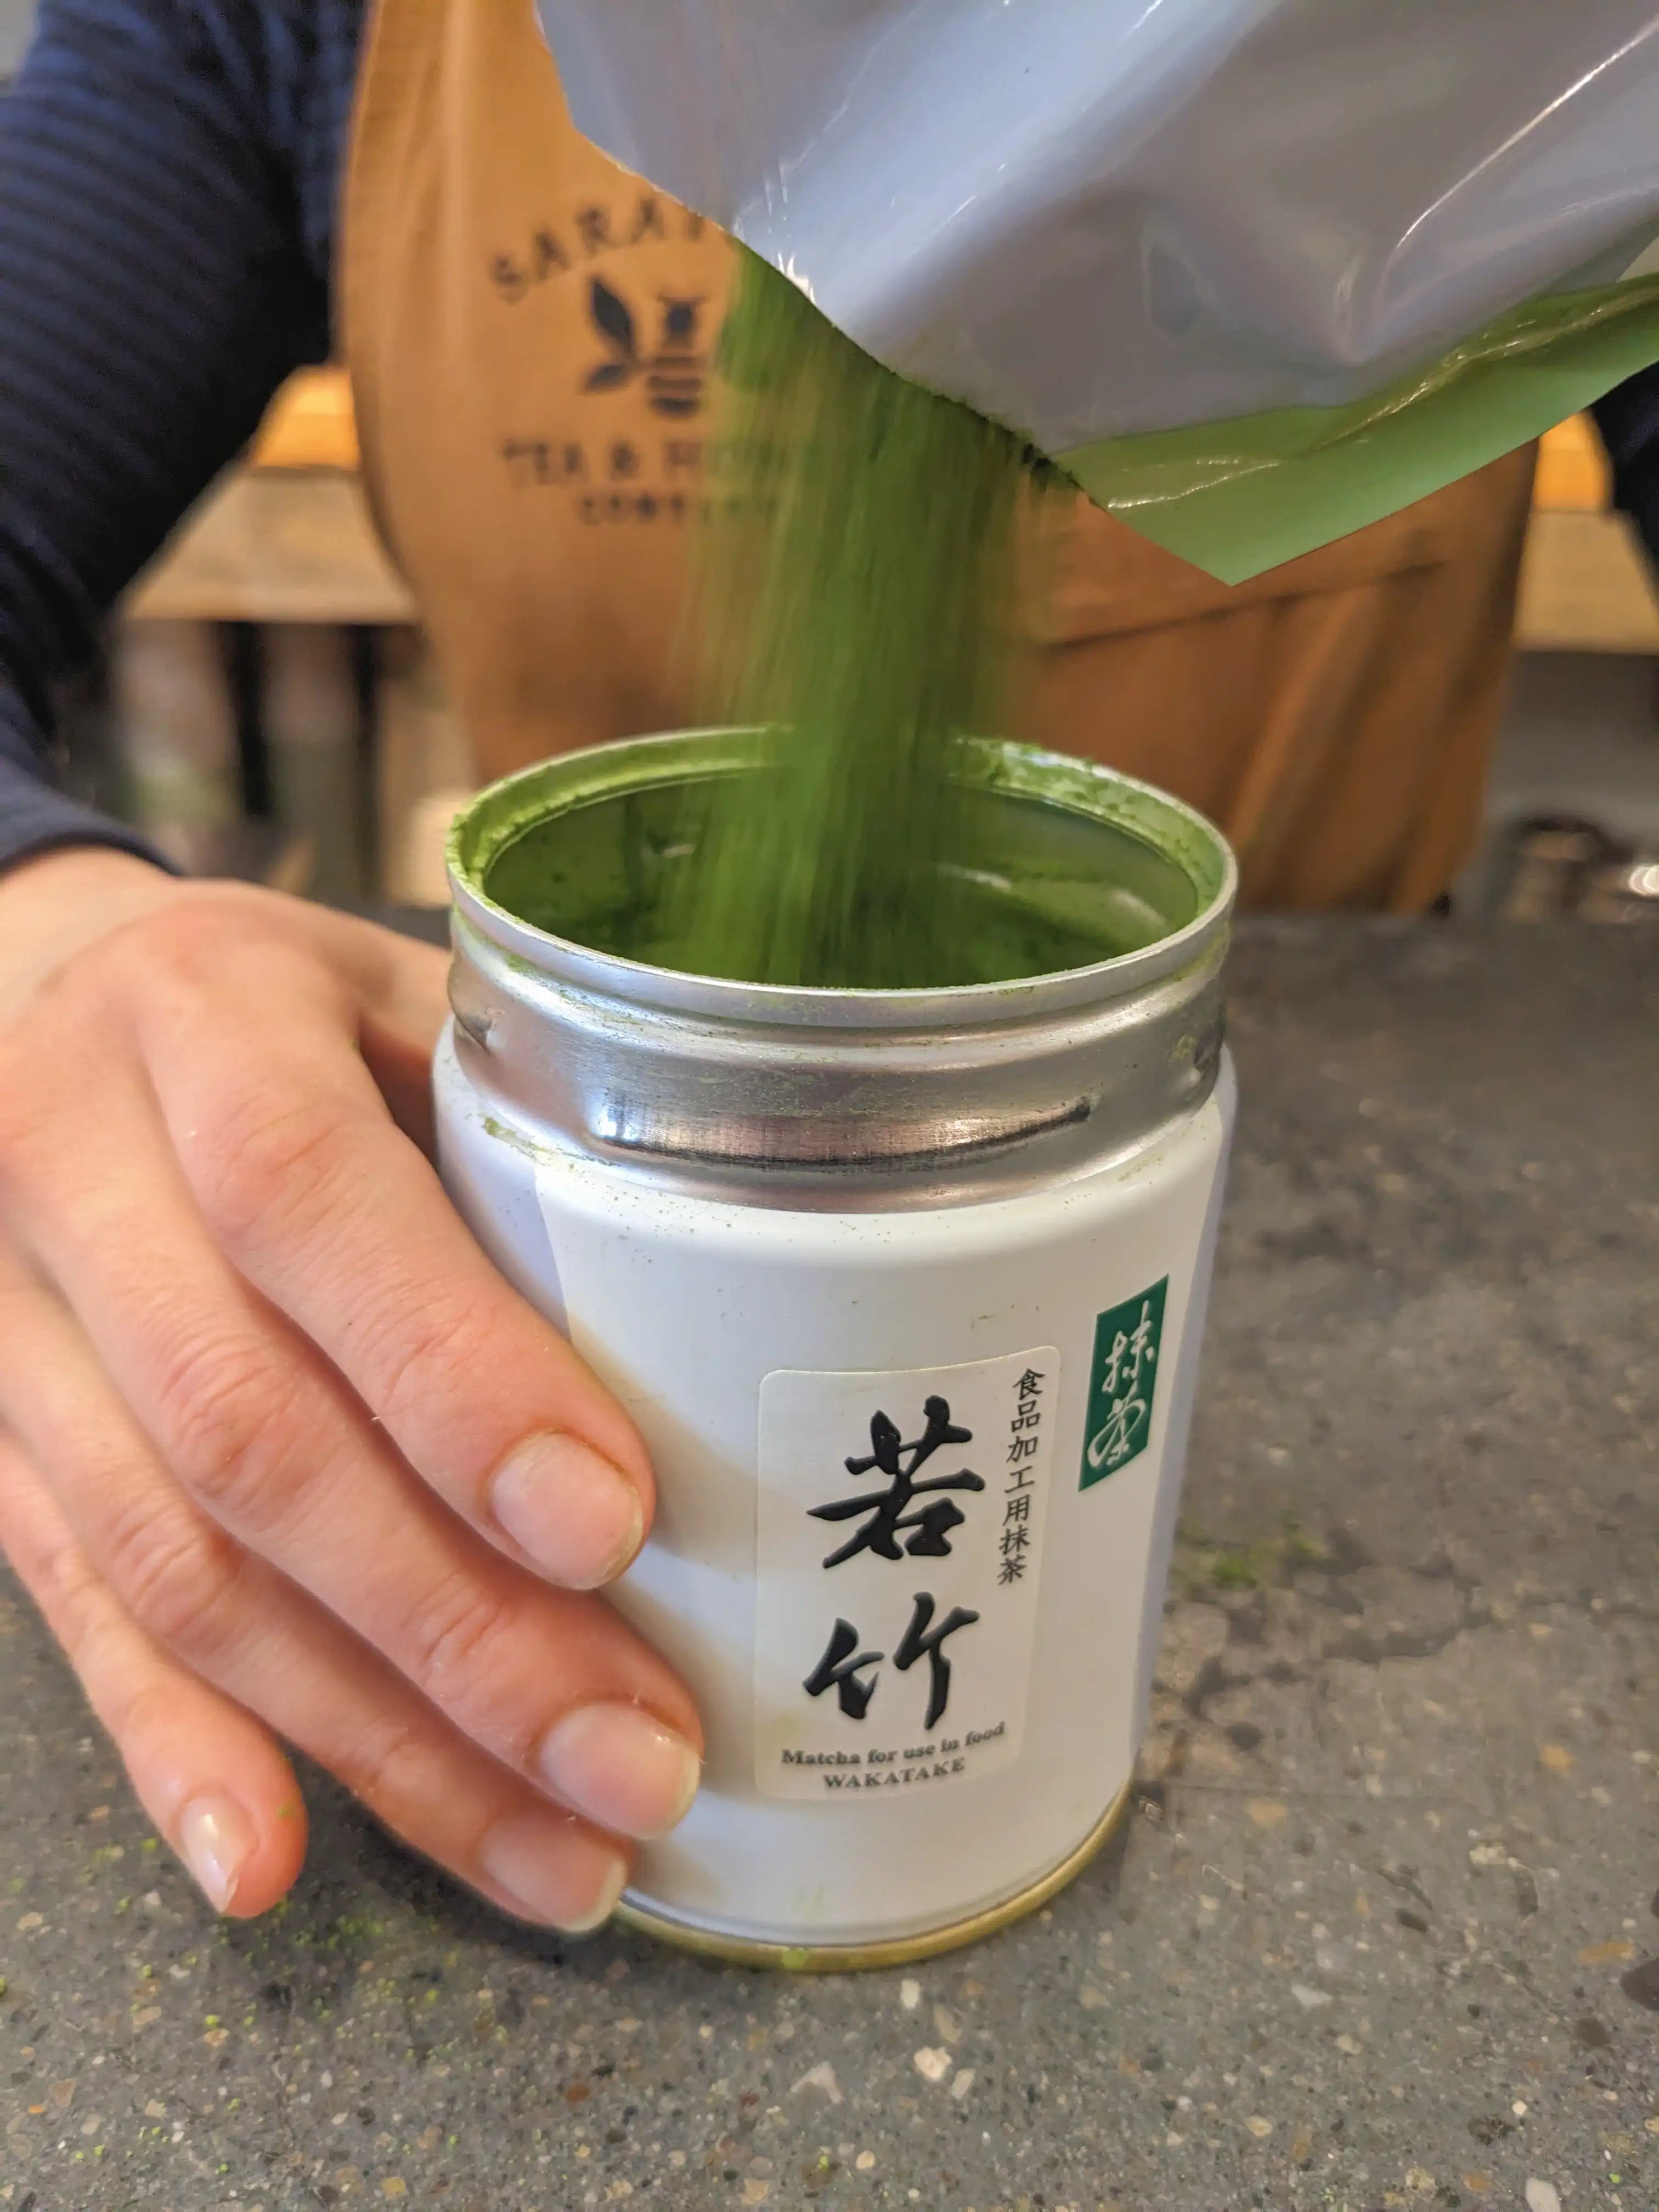 Refilling a Matcha Wakatake Tin for 10% off to encourage sustainability!